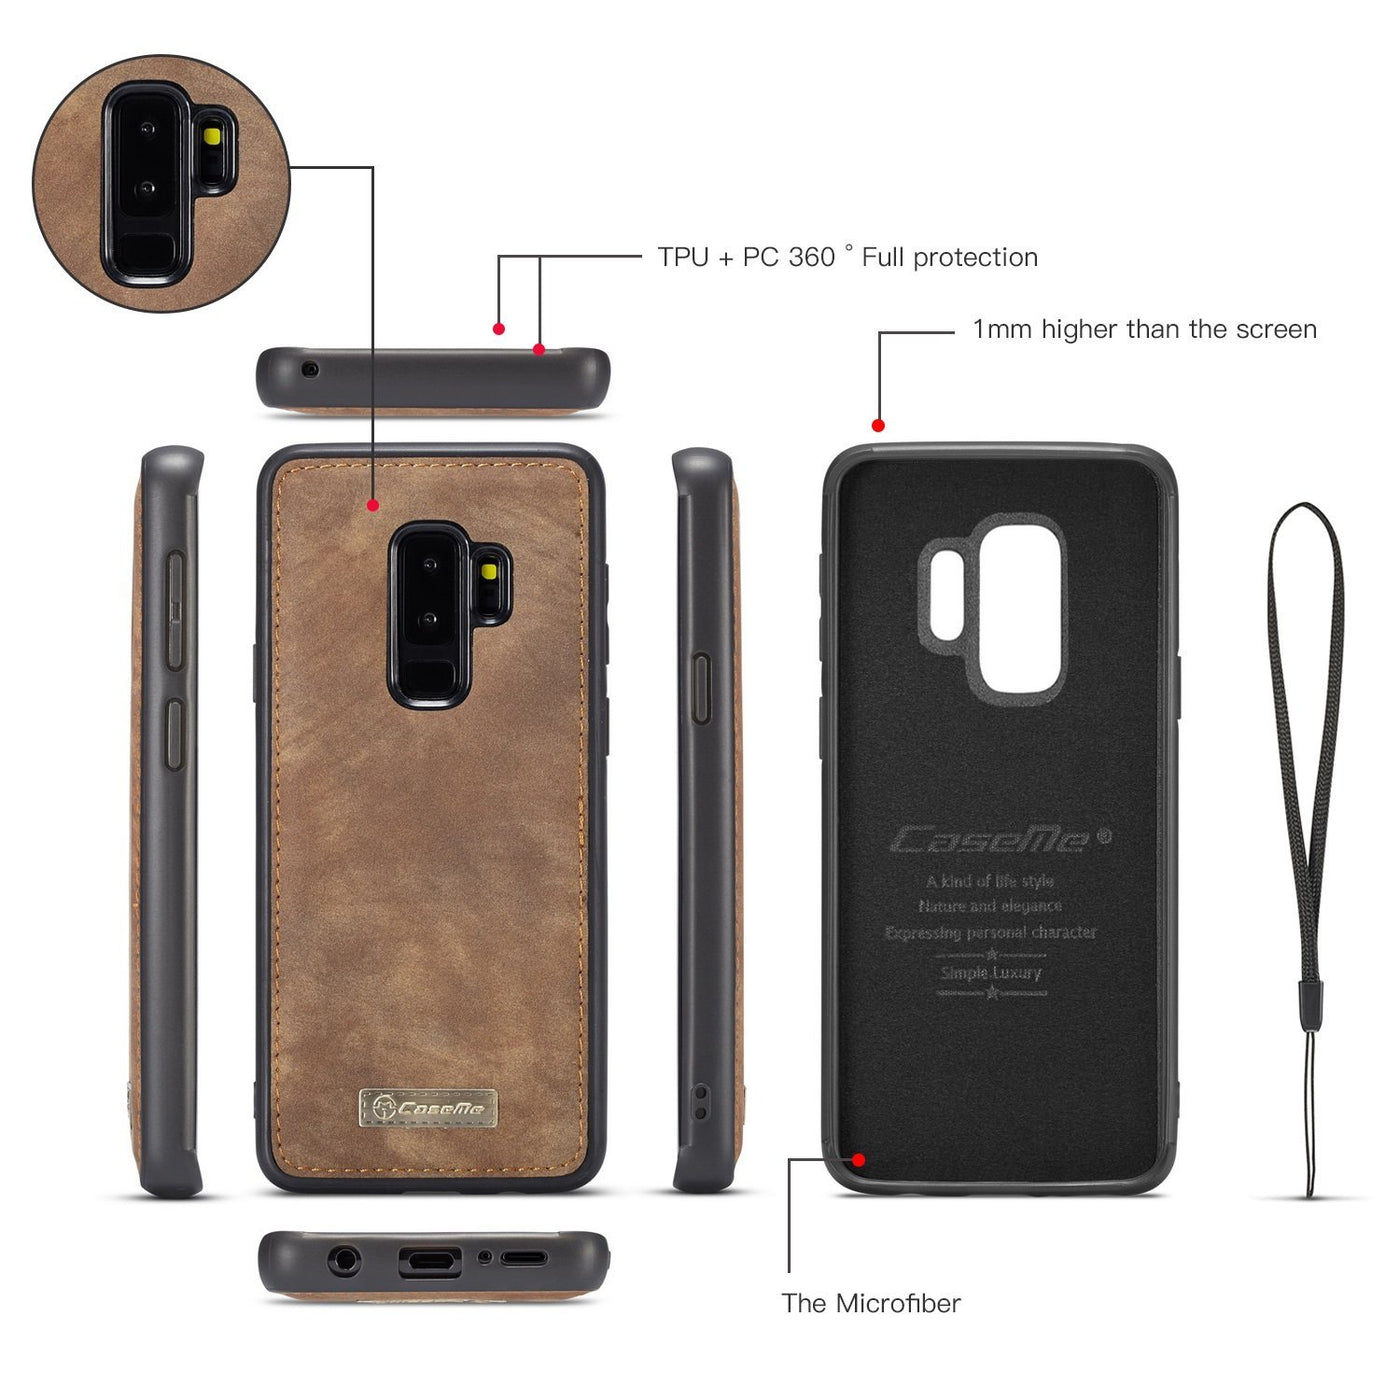 Excelsior Premium Multifunctional Leather Wallet Flip Cover Case For Samsung Galaxy S9 Plus